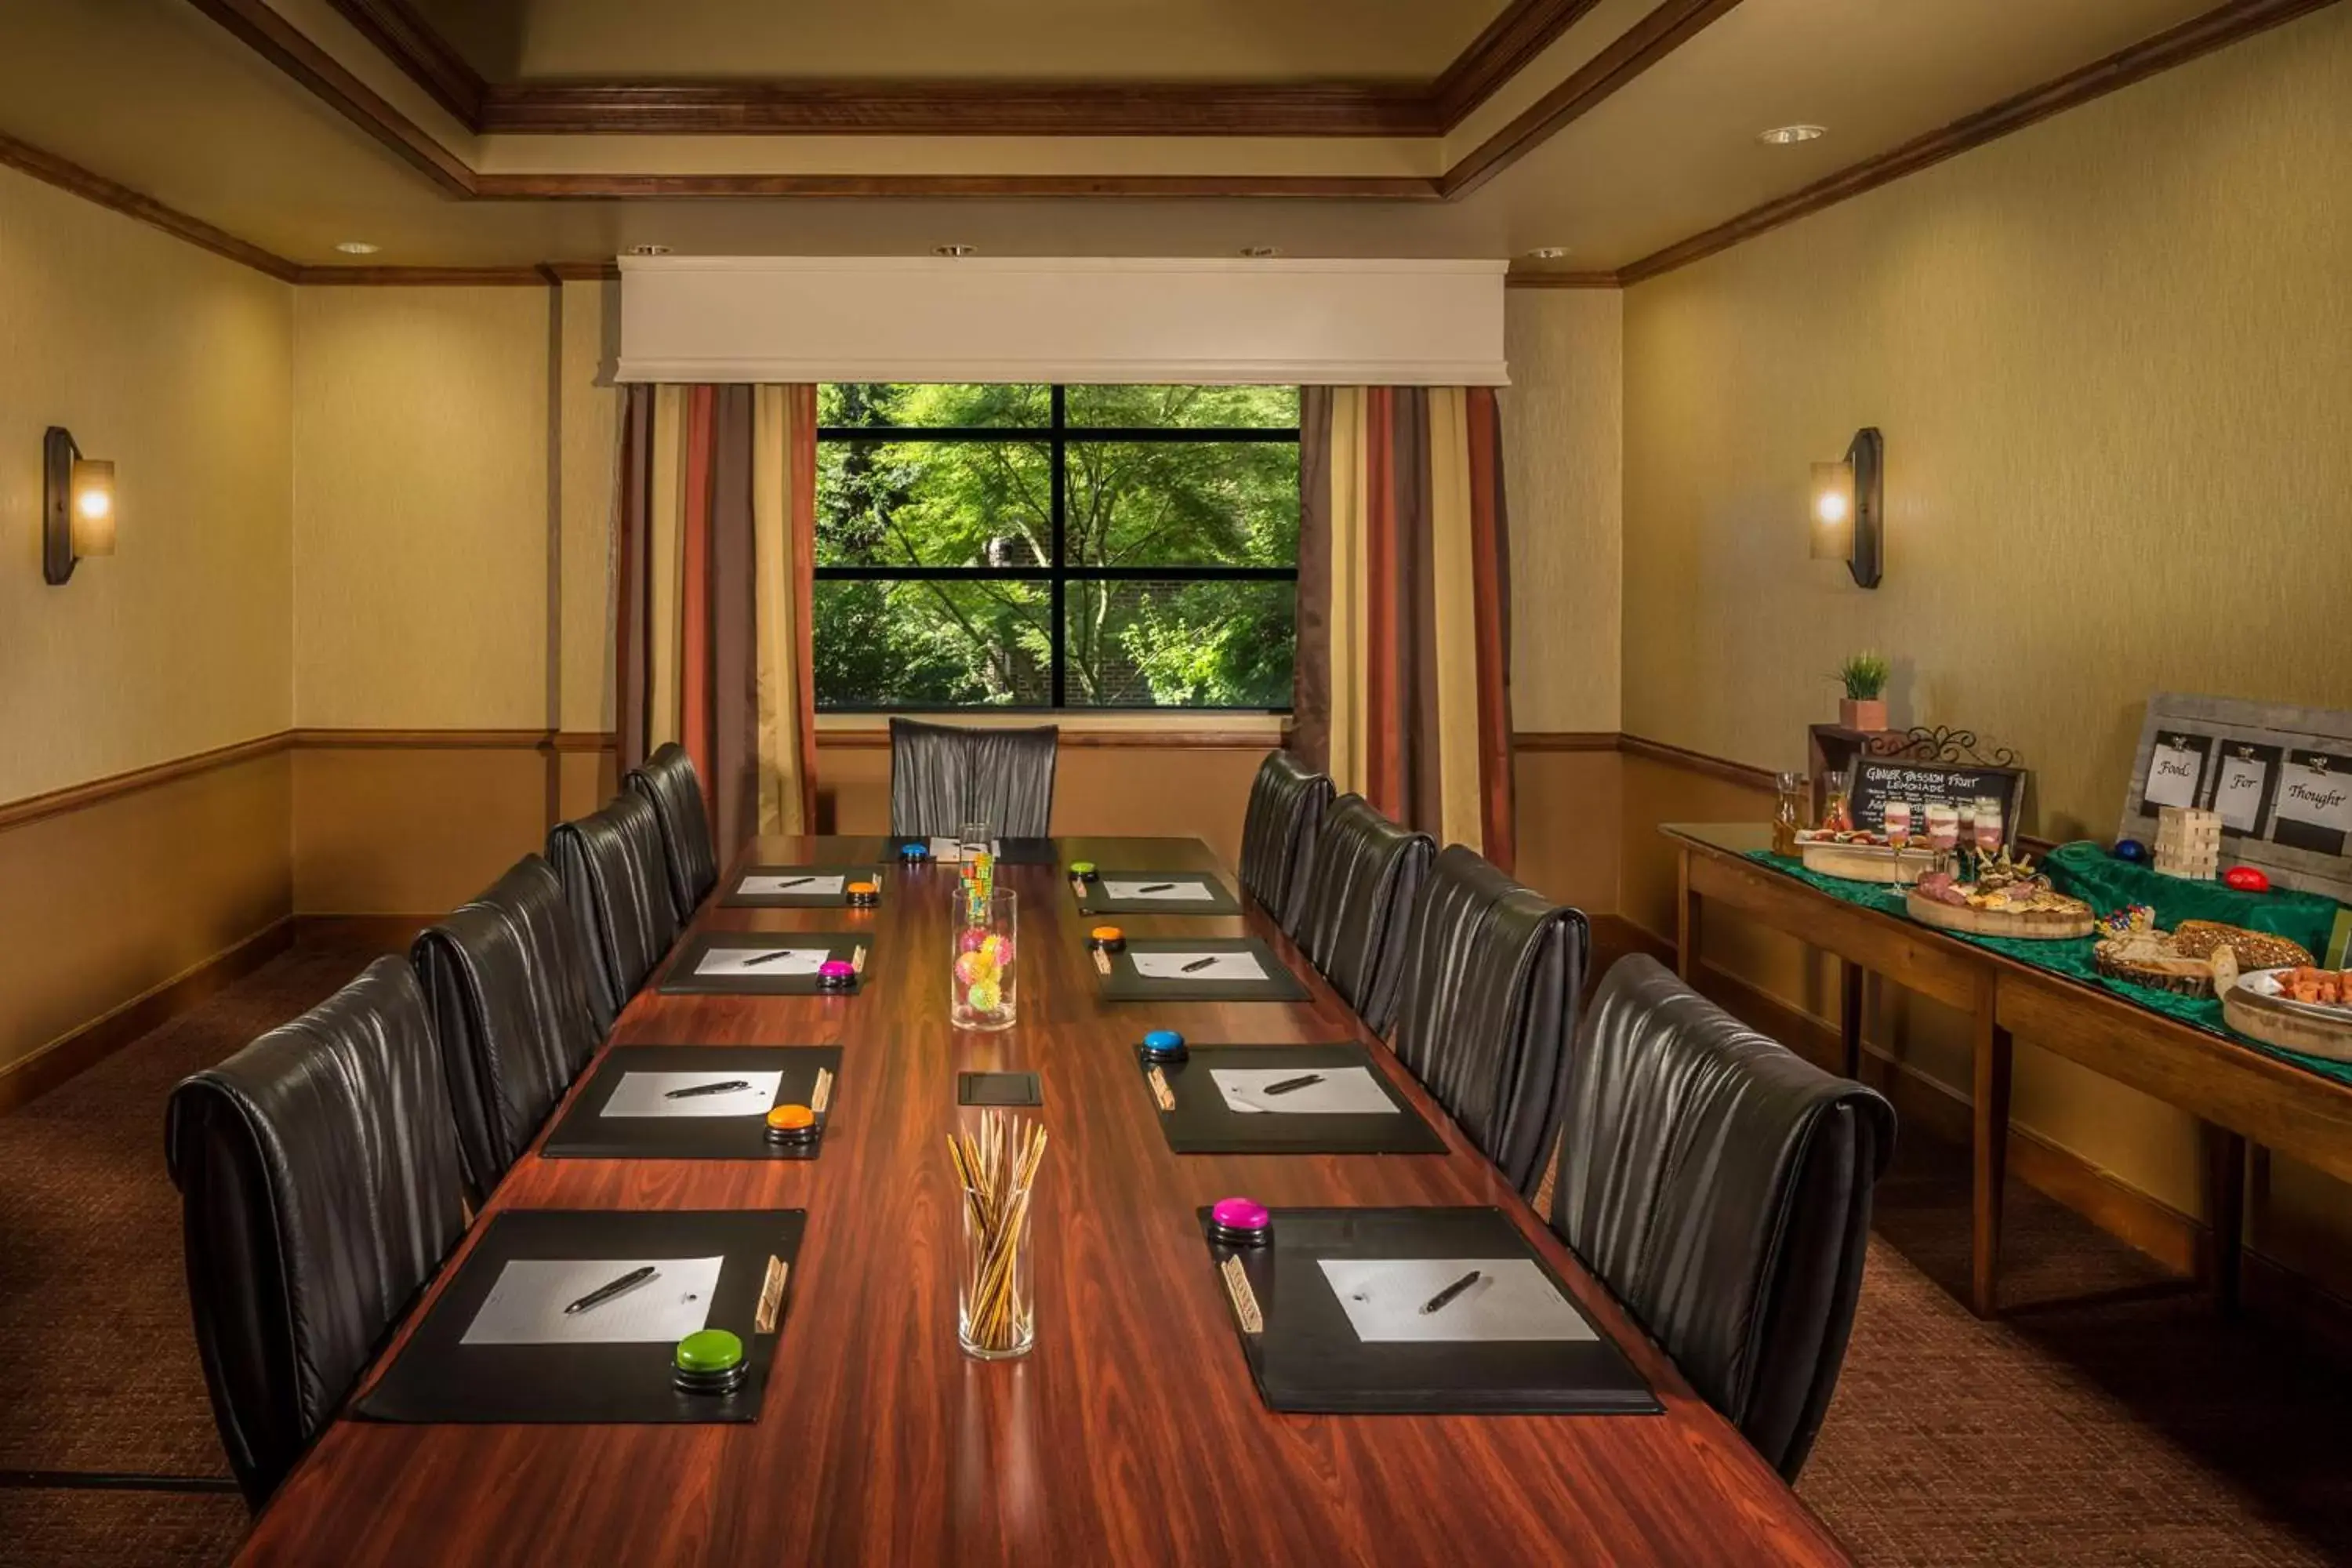 Meeting/conference room in DoubleTree by Hilton Biltmore/Asheville